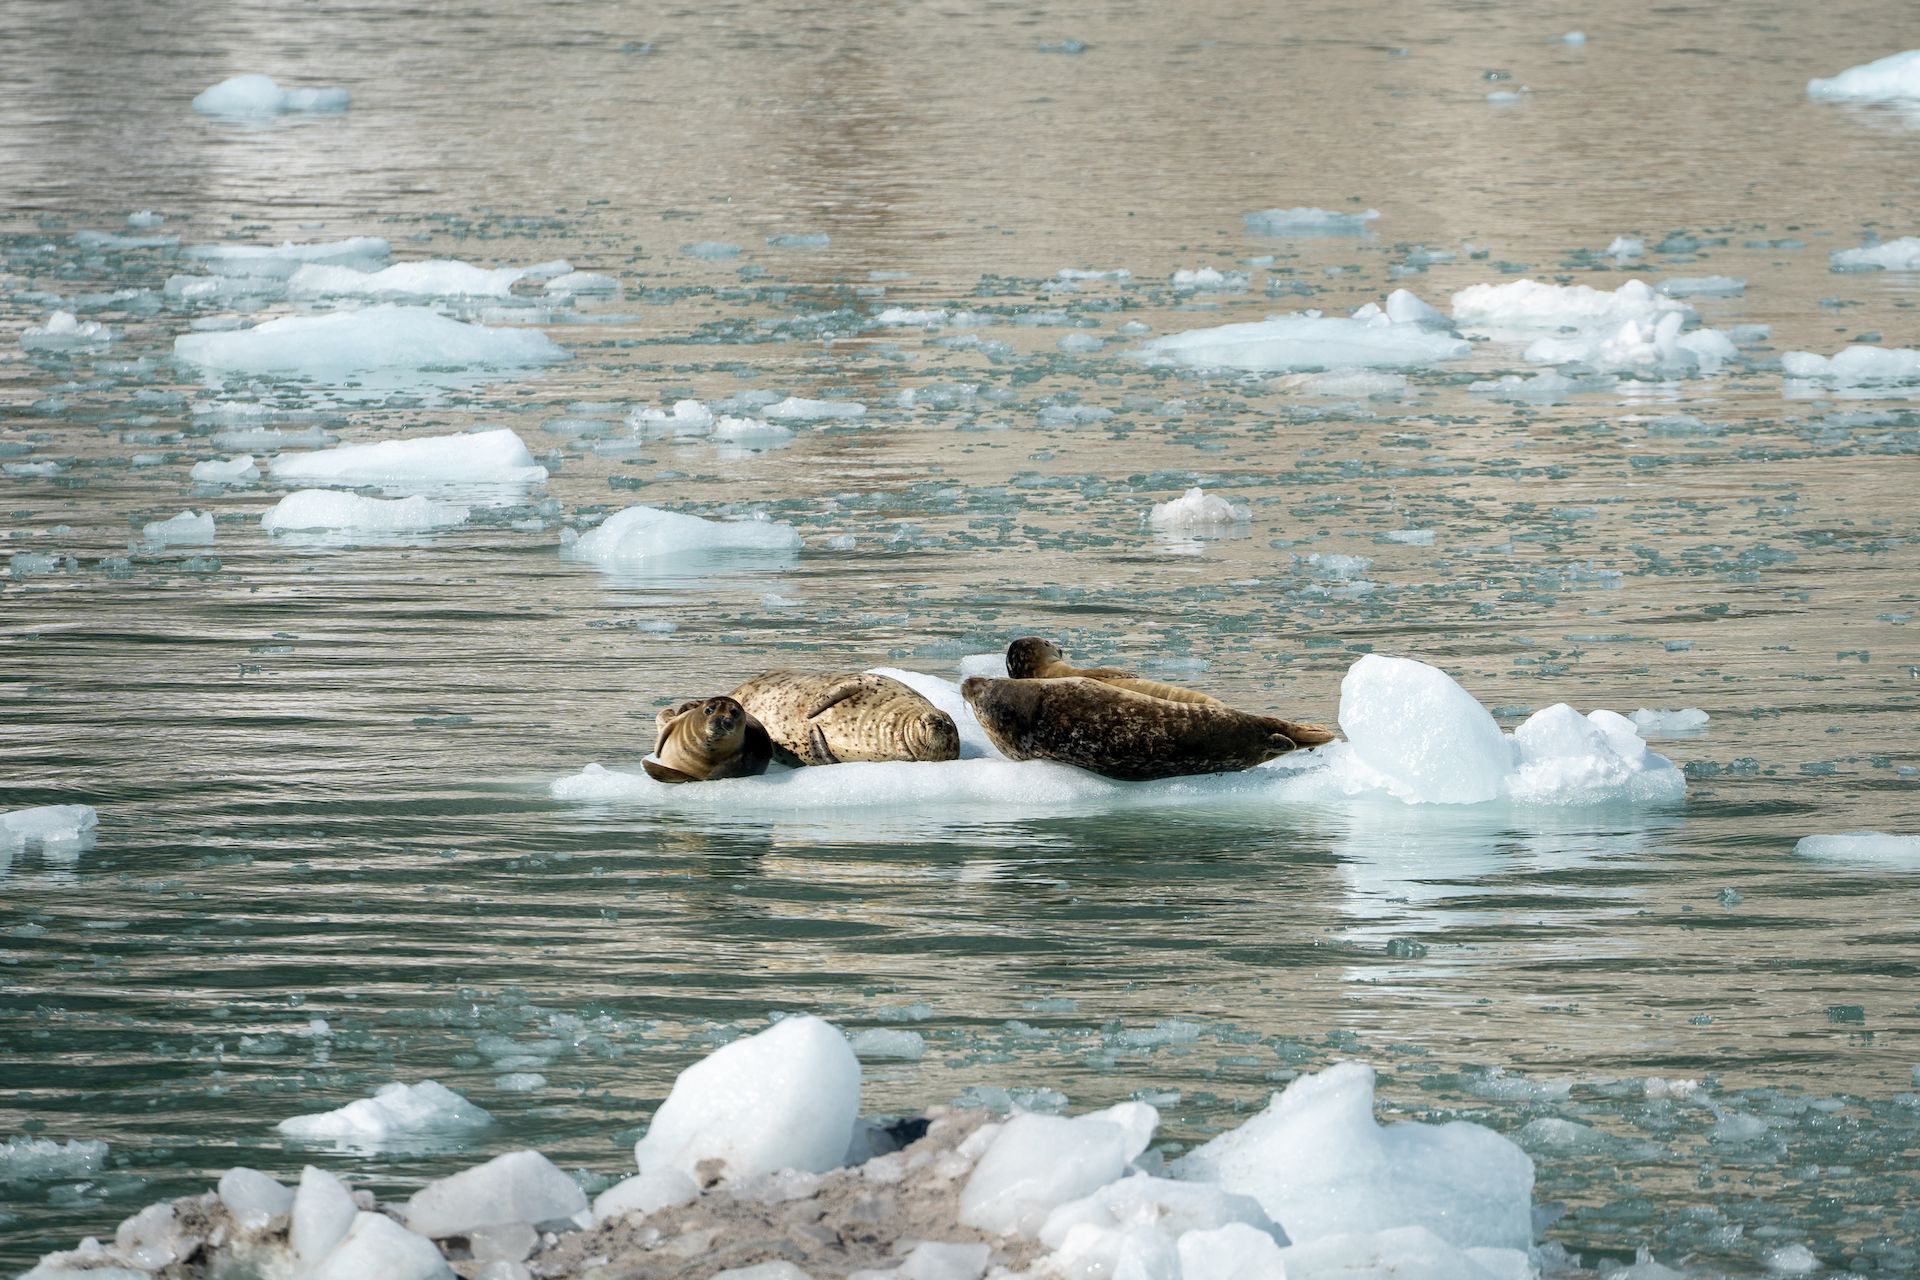 Some harbor seals chilling on a tiny piece of ice